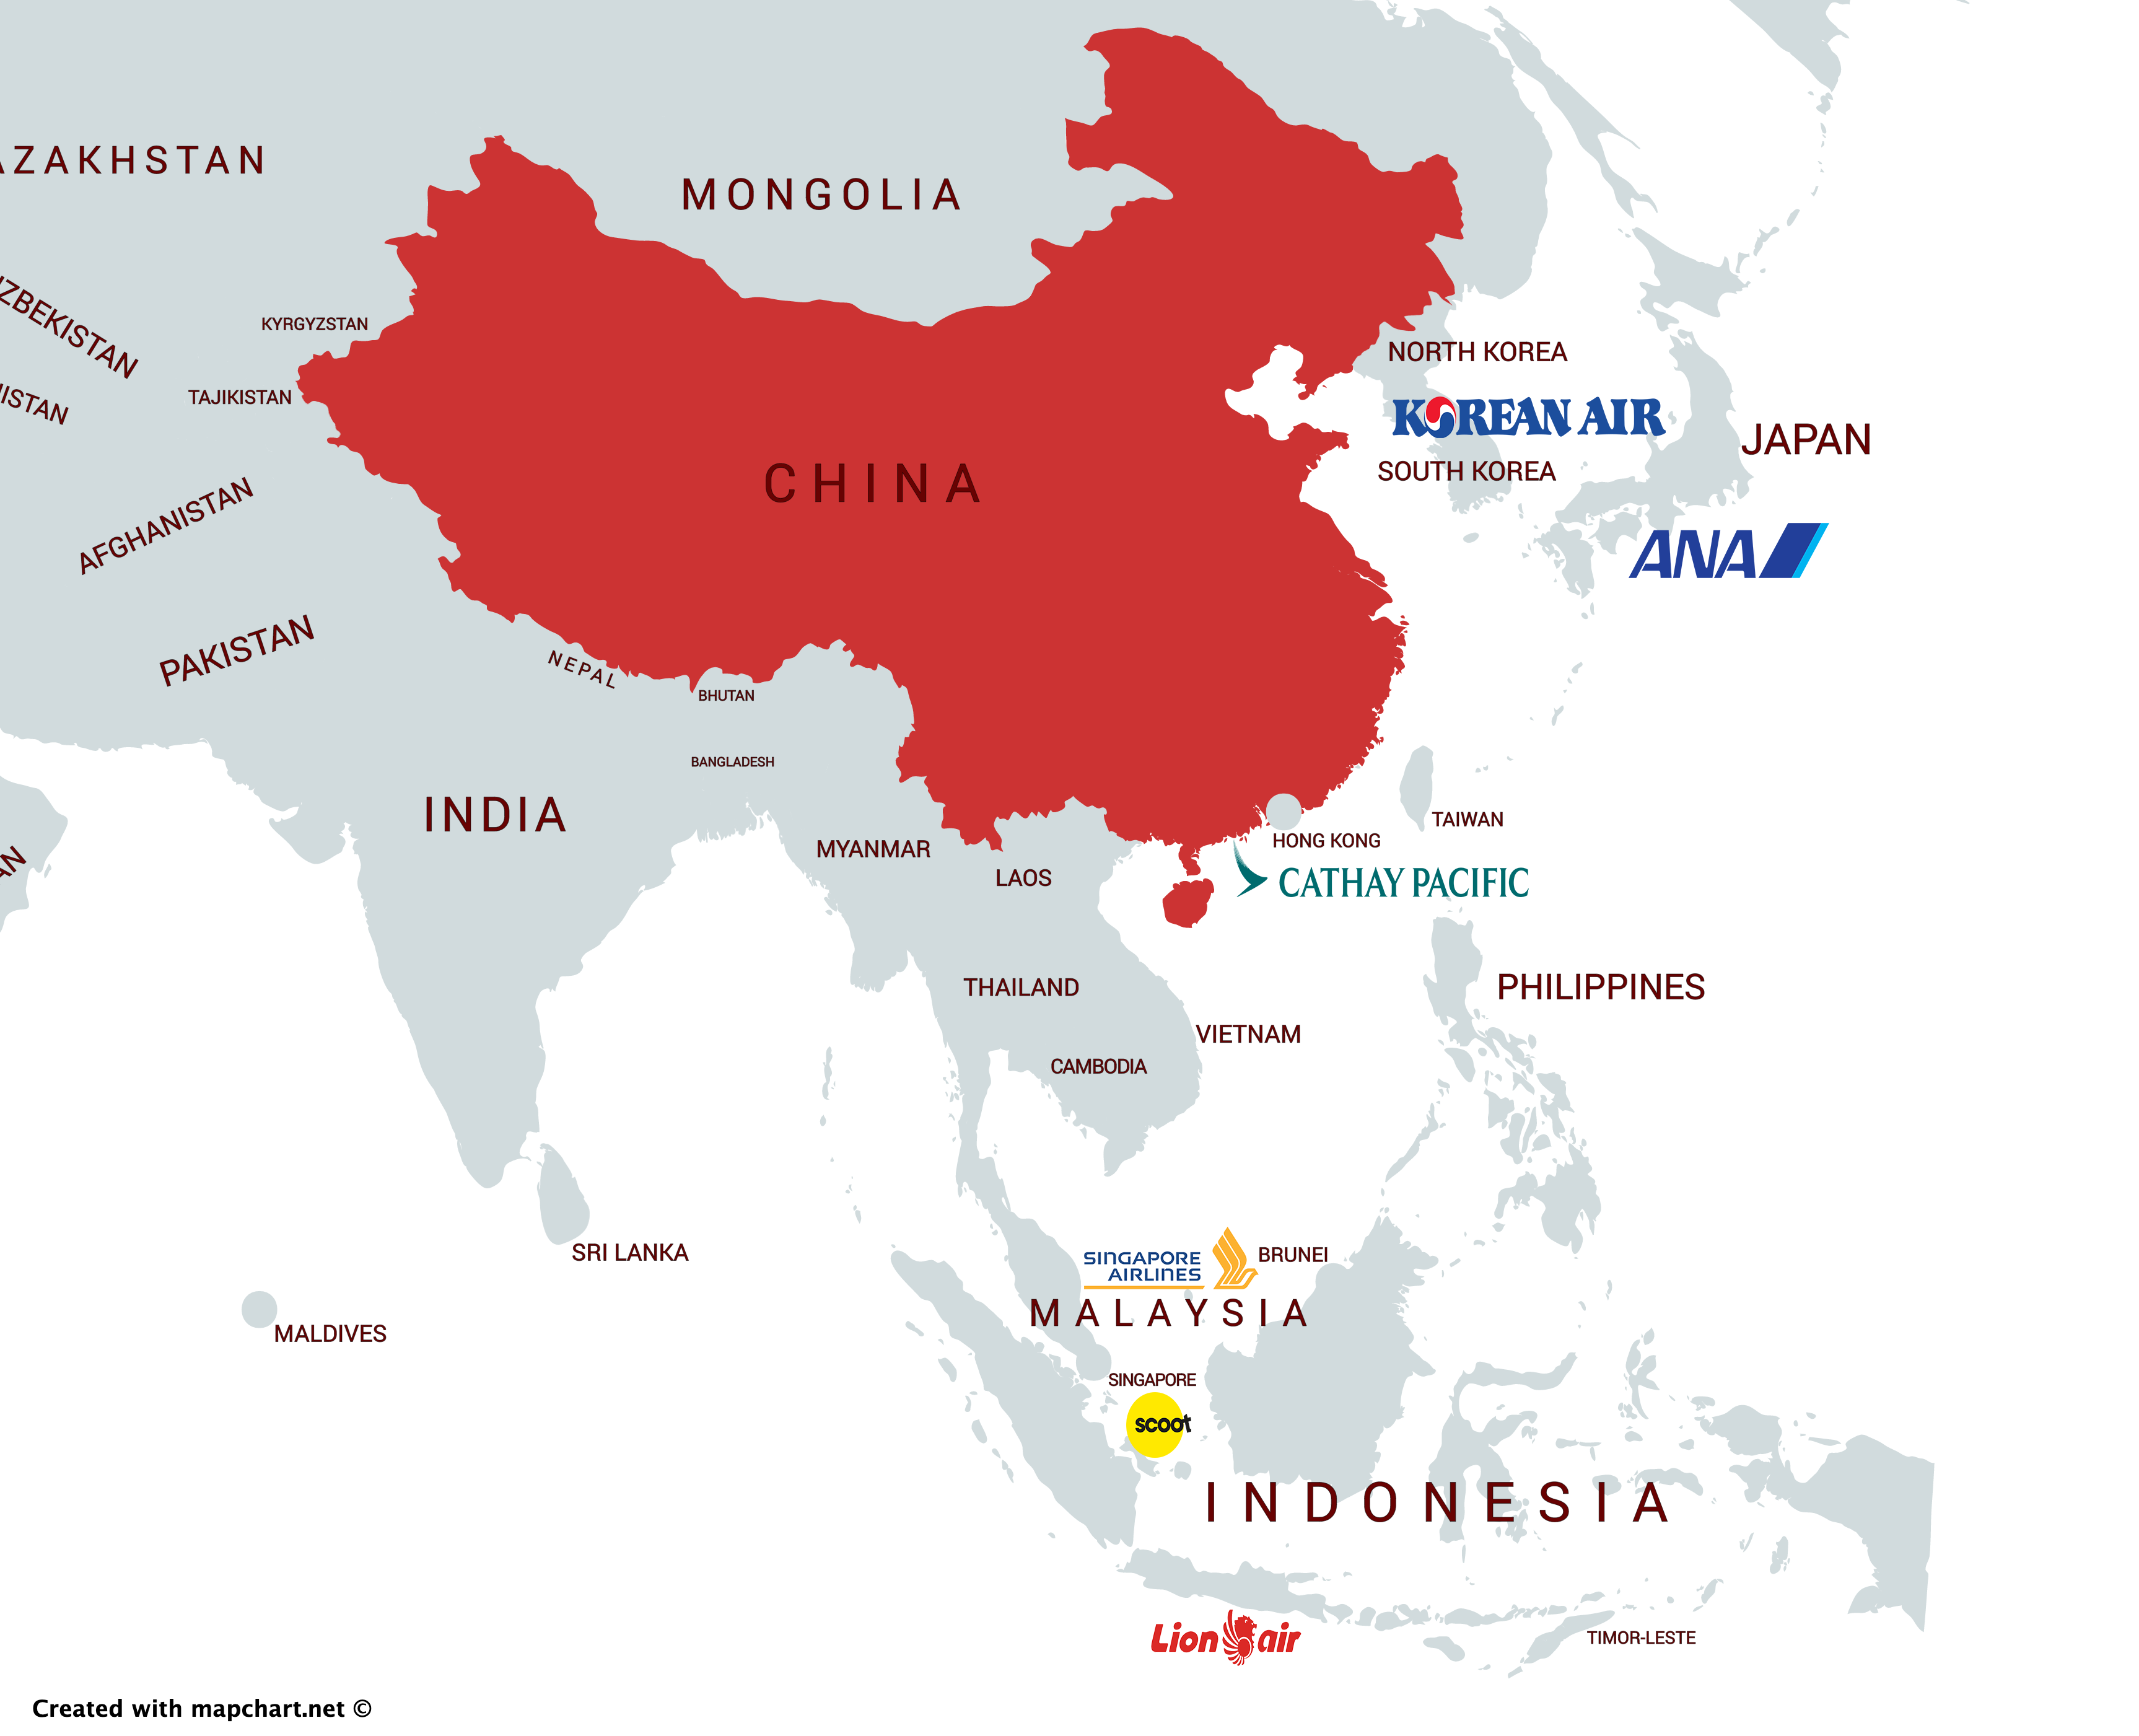 Some of the most affected foreign carriers by the China lockdown.